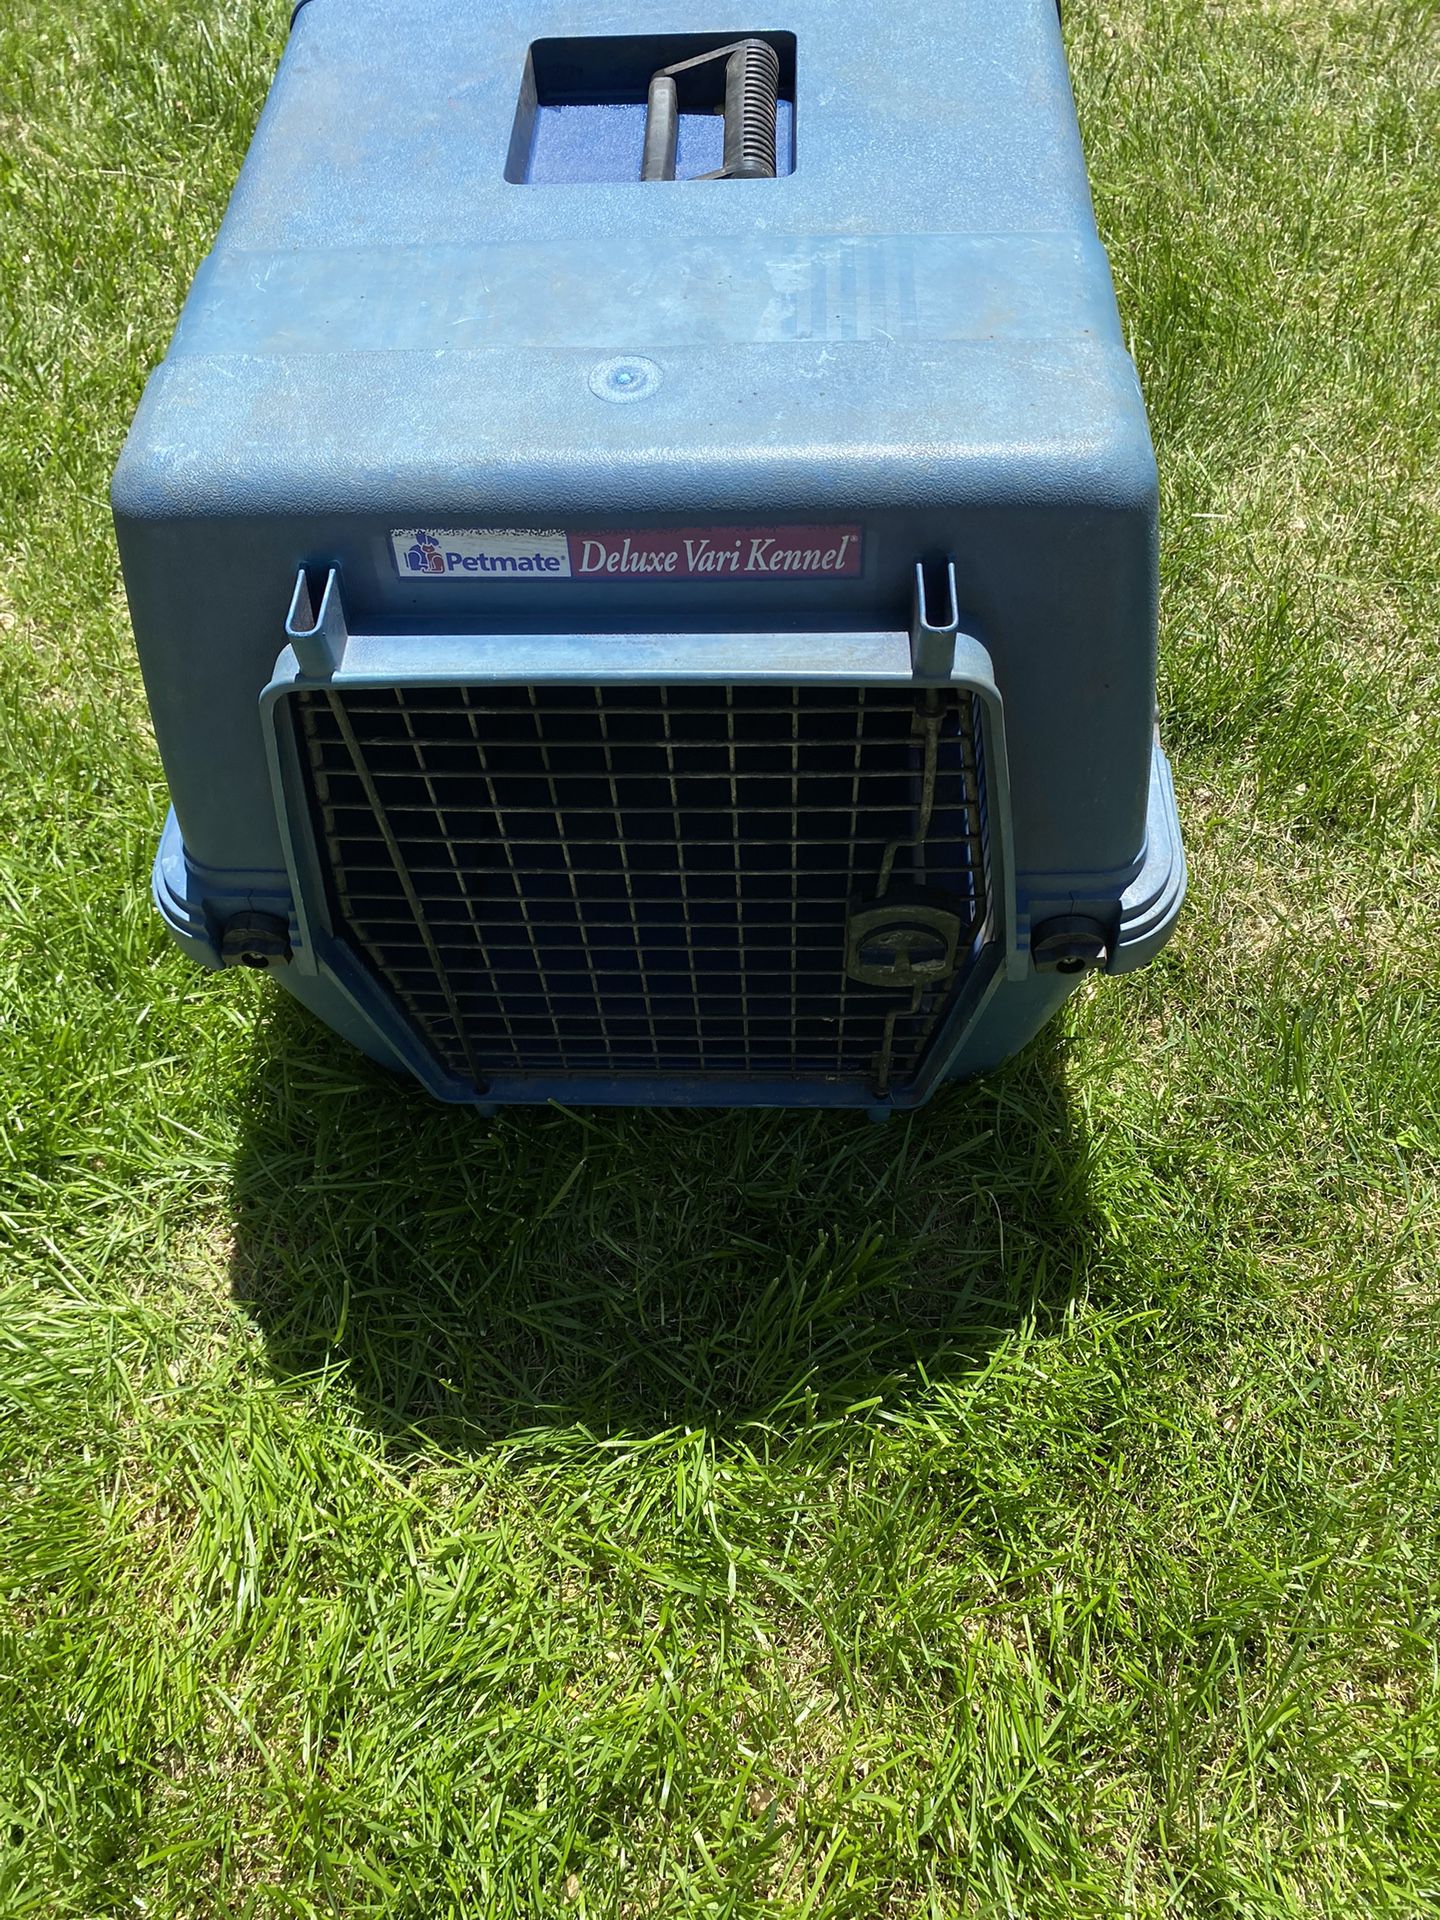 Petmate Deluxe Vari Kennel 28 Long 20 High and 21 Wide